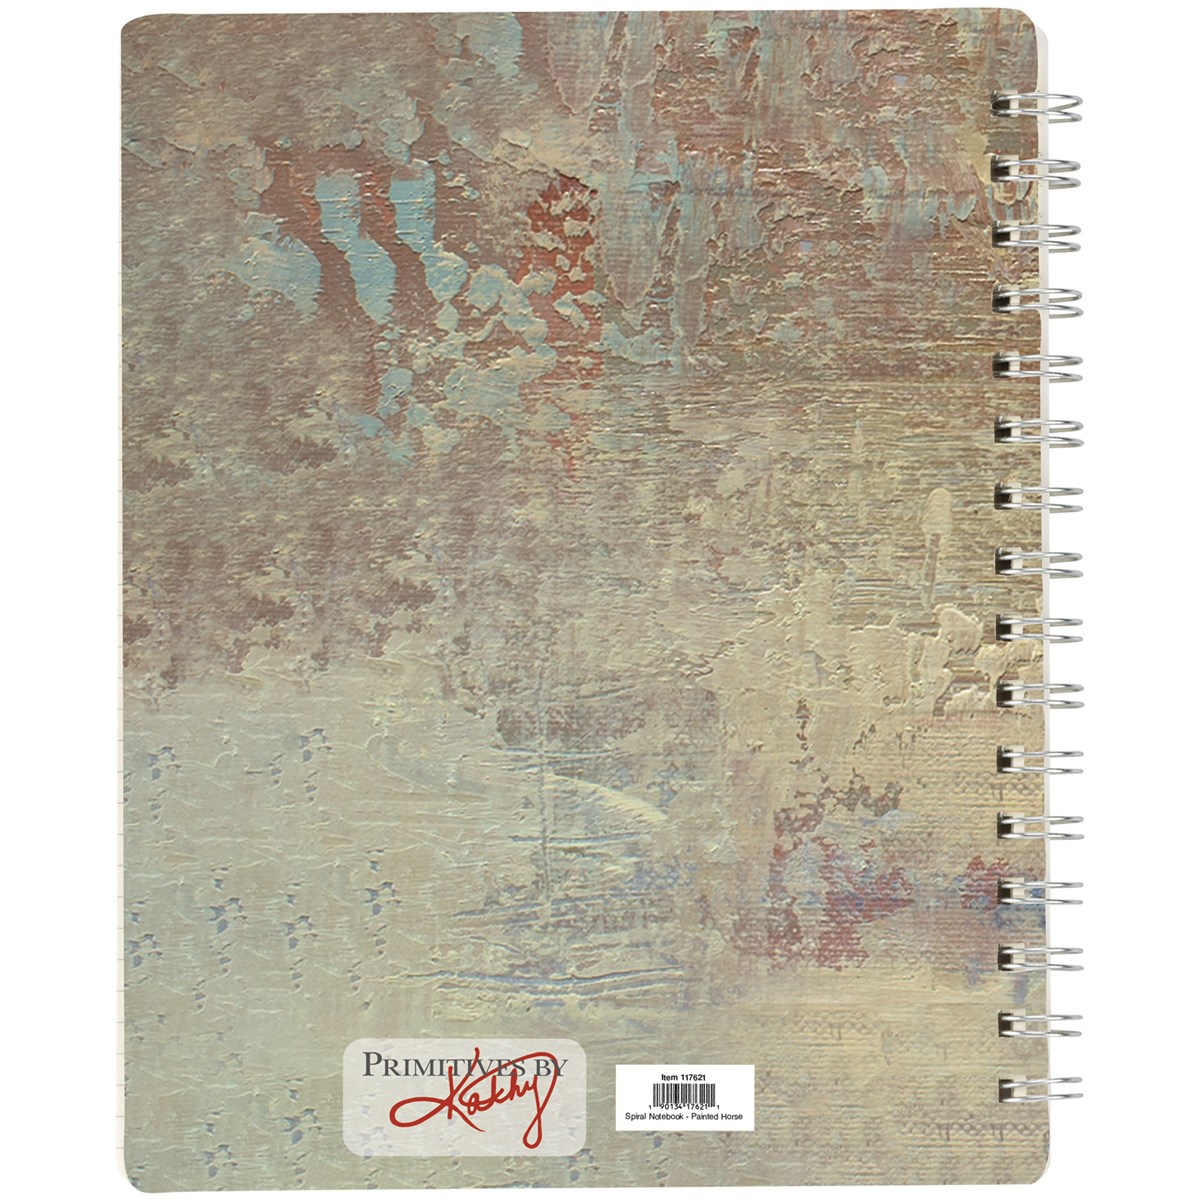 Painted Horse Spiral Notebook - Paper, Metal